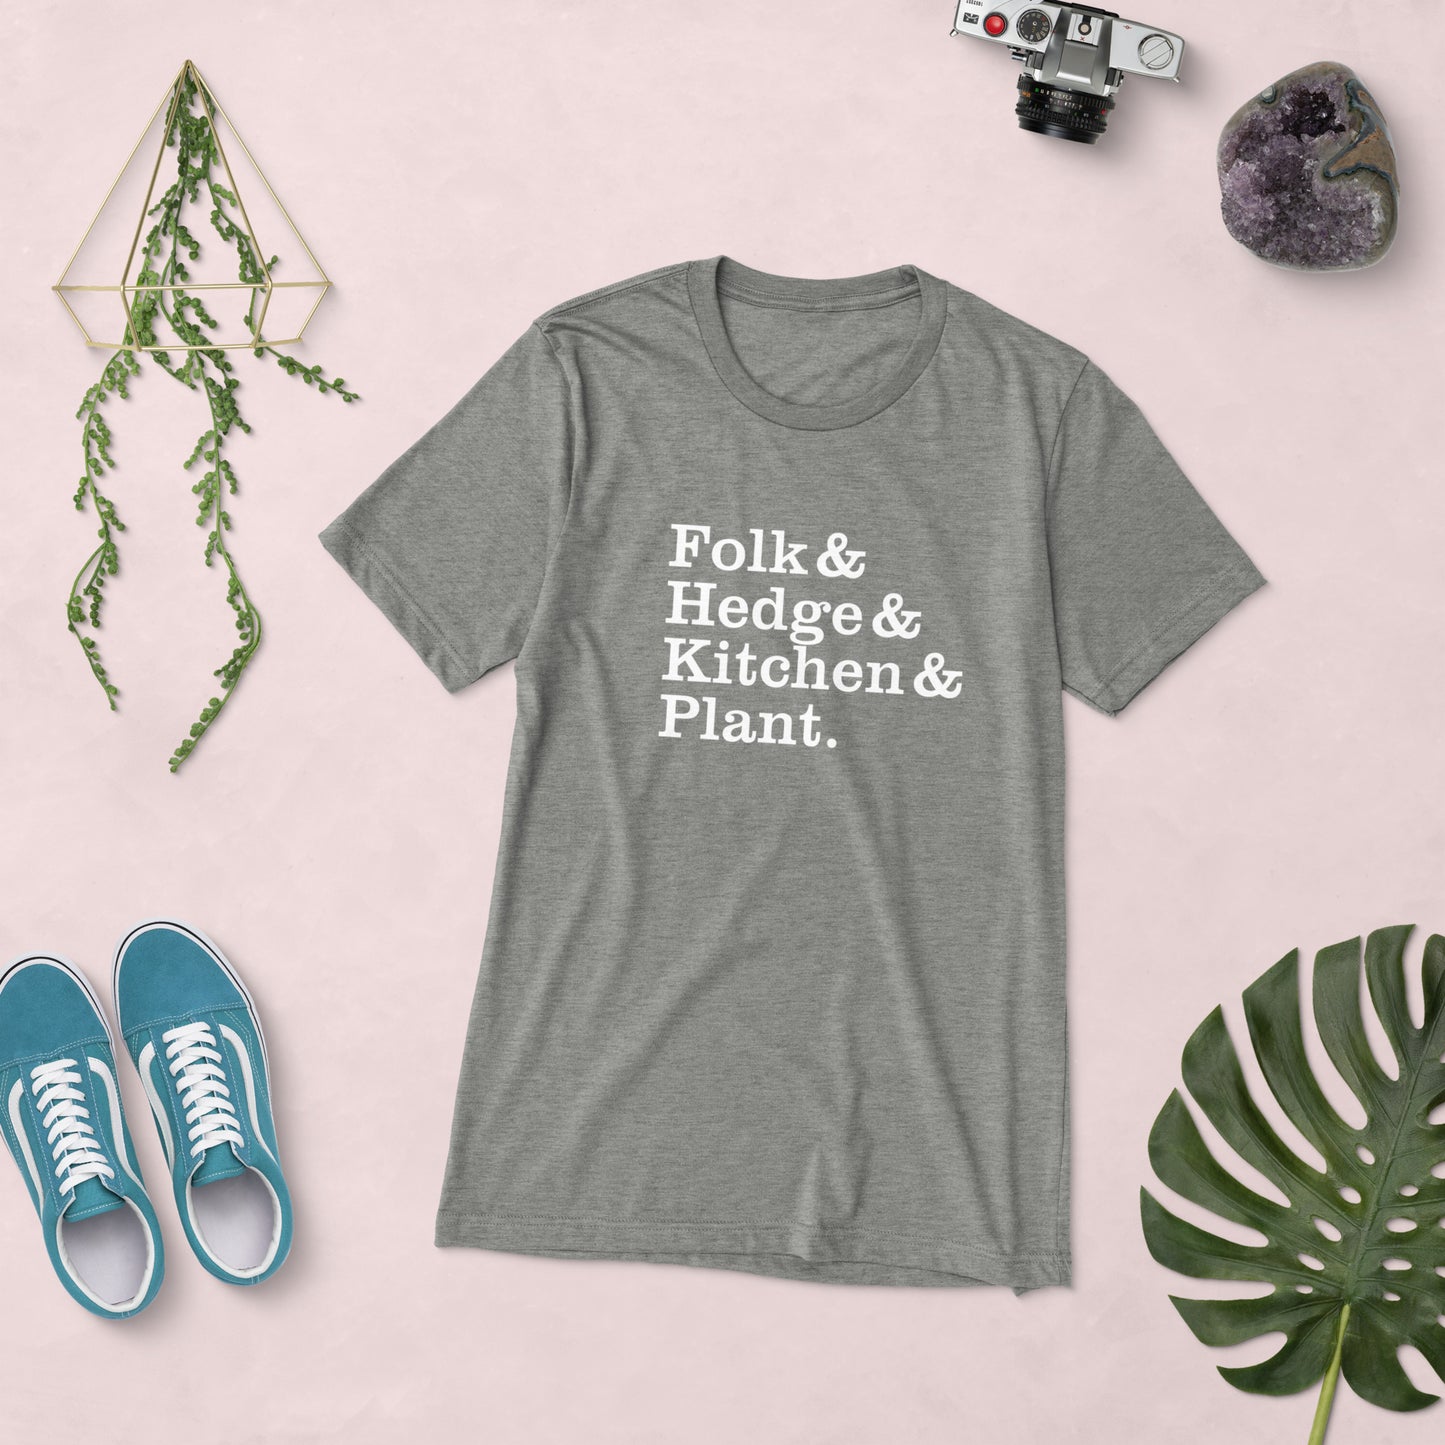 Folk Witch, Hedge Witch, Kitchen Witch, Plant Witch - Our Witch List T-shirt